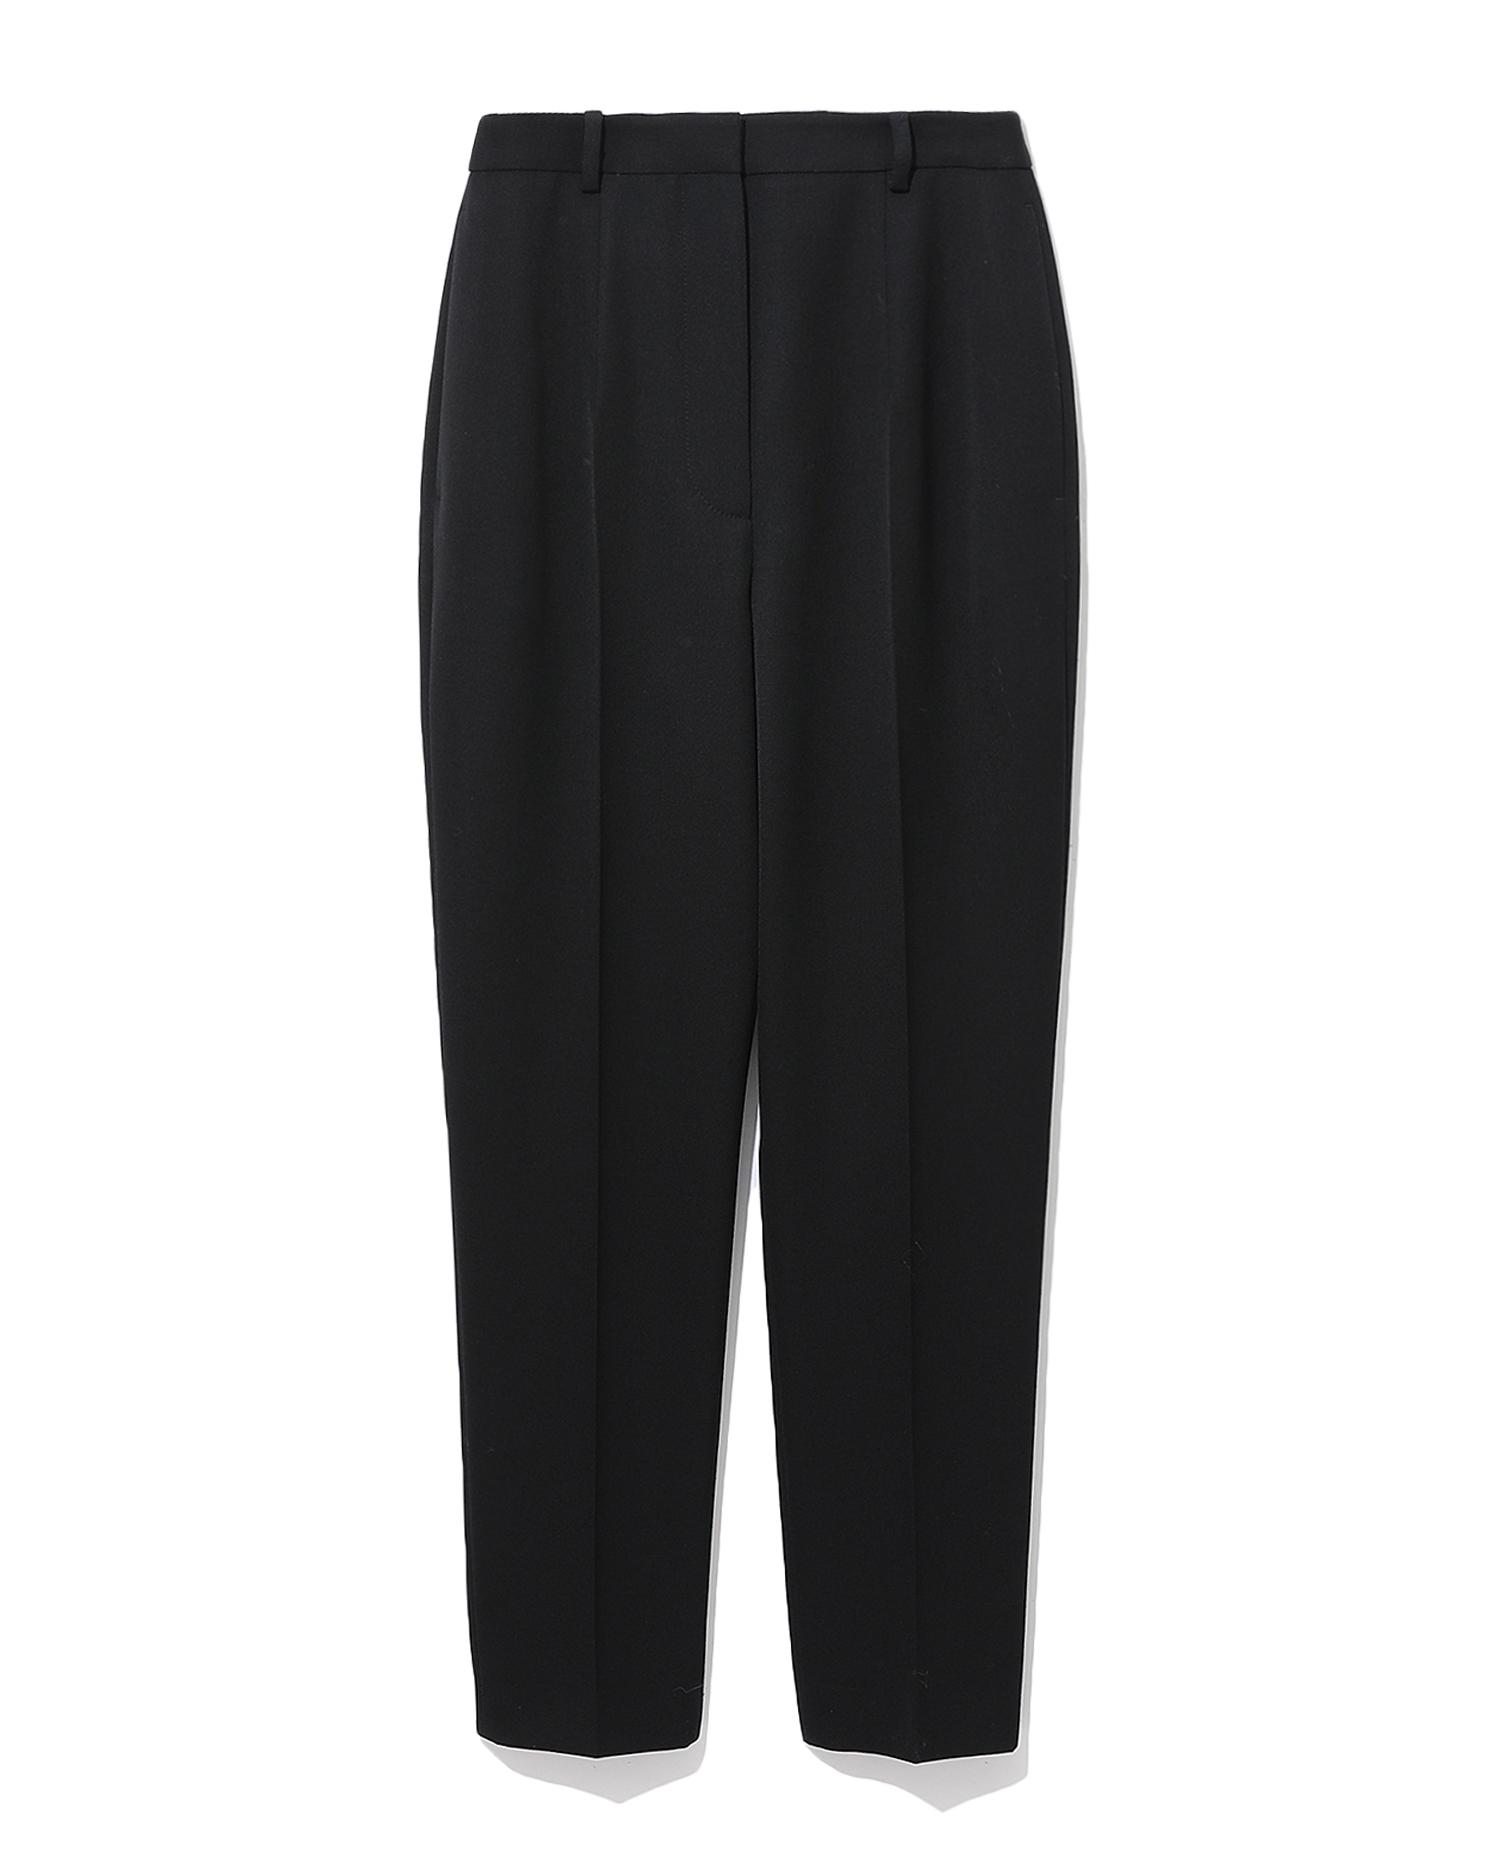 Cropped pants by ALEXANDER MCQUEEN